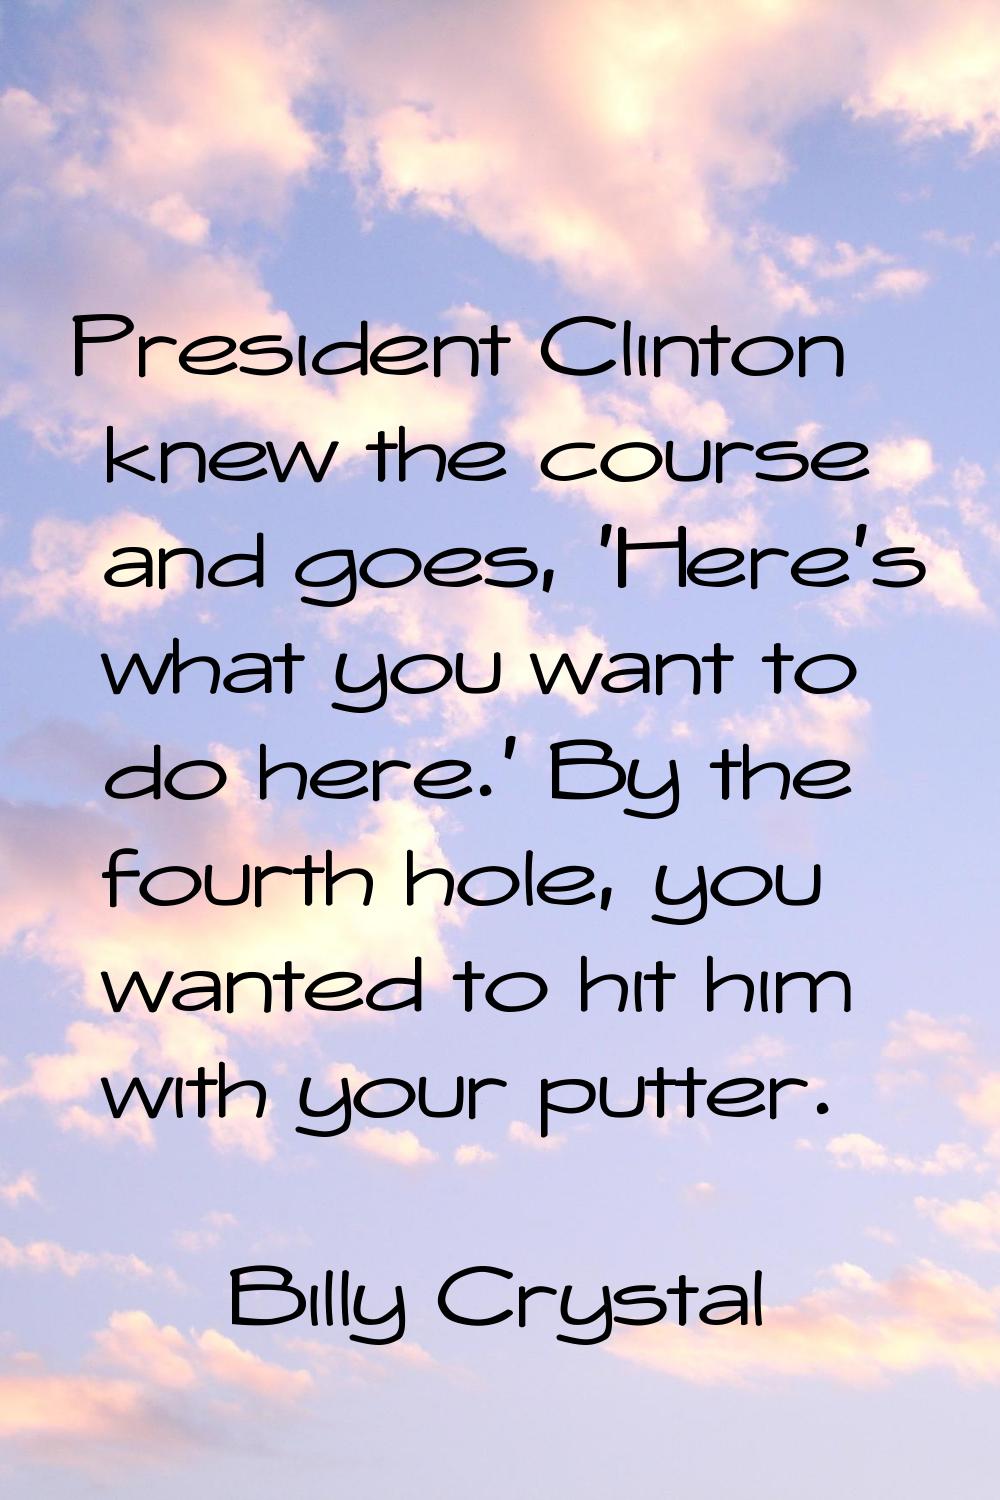 President Clinton knew the course and goes, 'Here's what you want to do here.' By the fourth hole, 